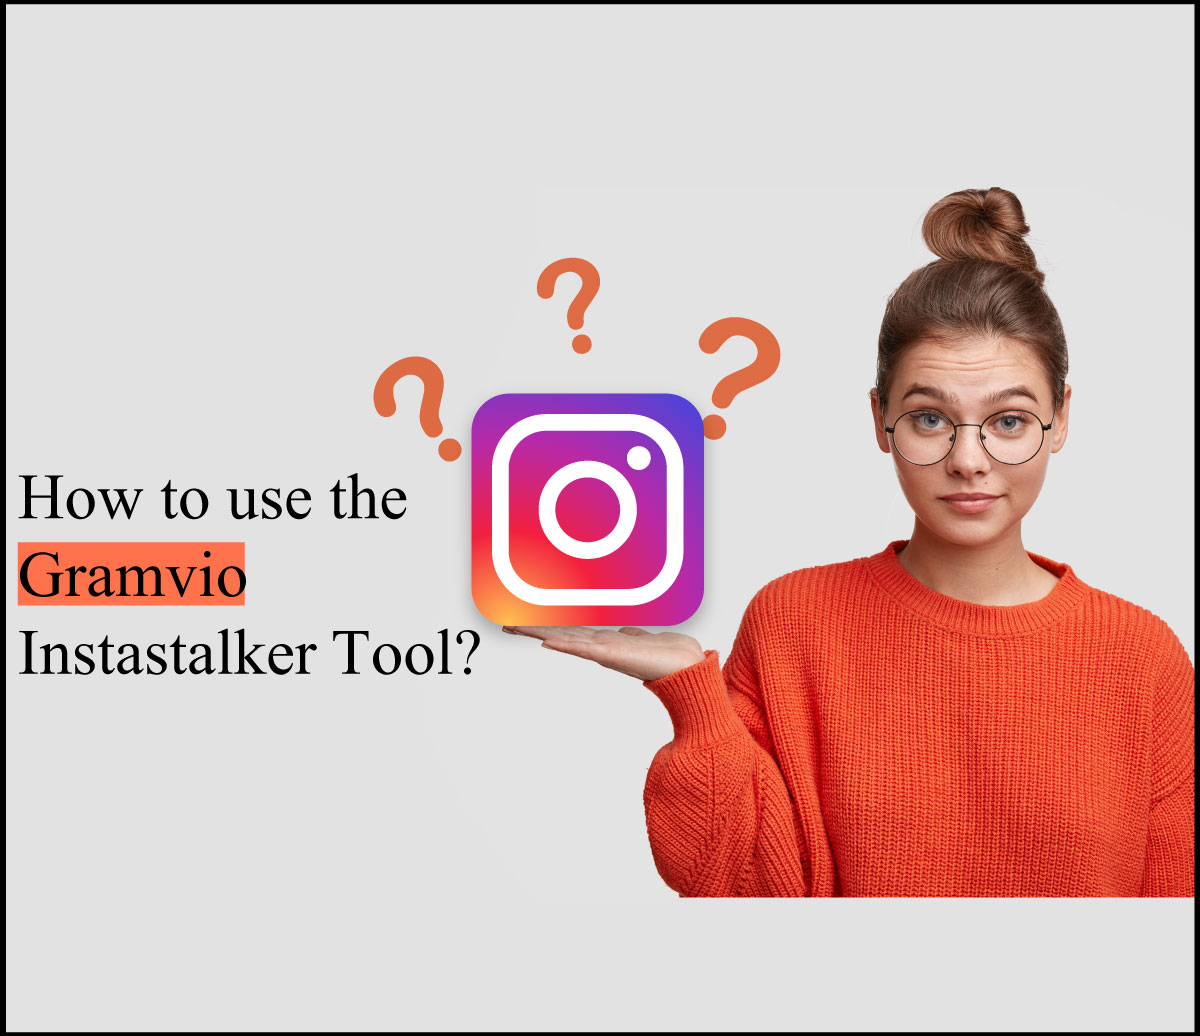 How to use the Gramvio Instastalker Tool?